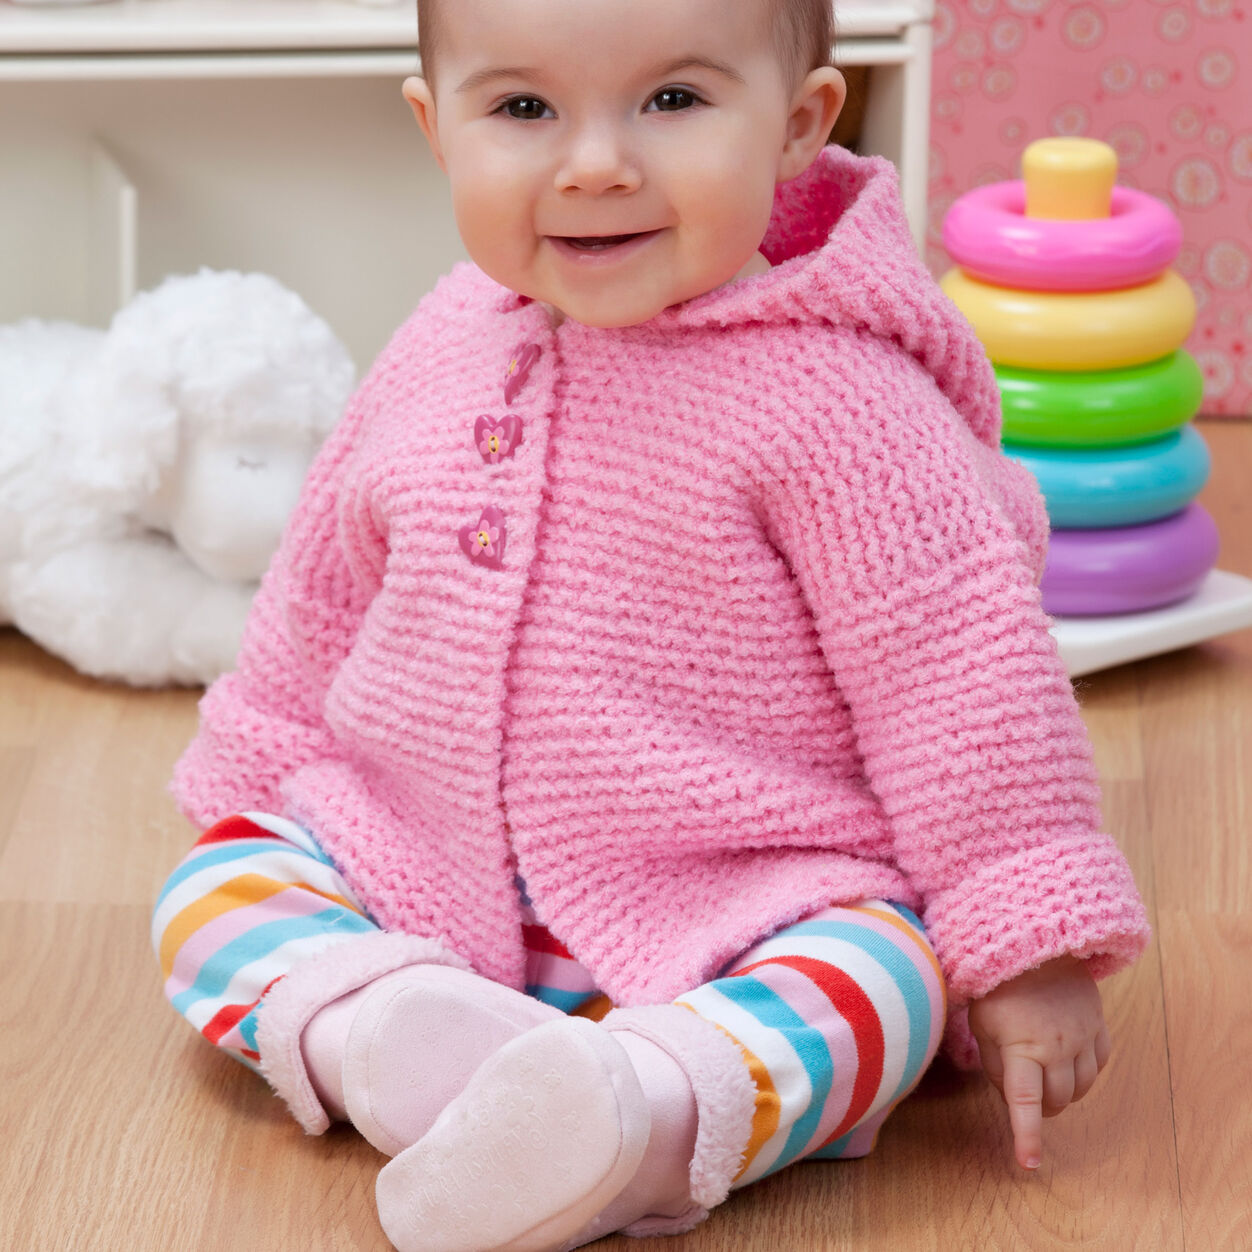 50 New Baby Knitting Patterns Free For 2020 Download Them Now 